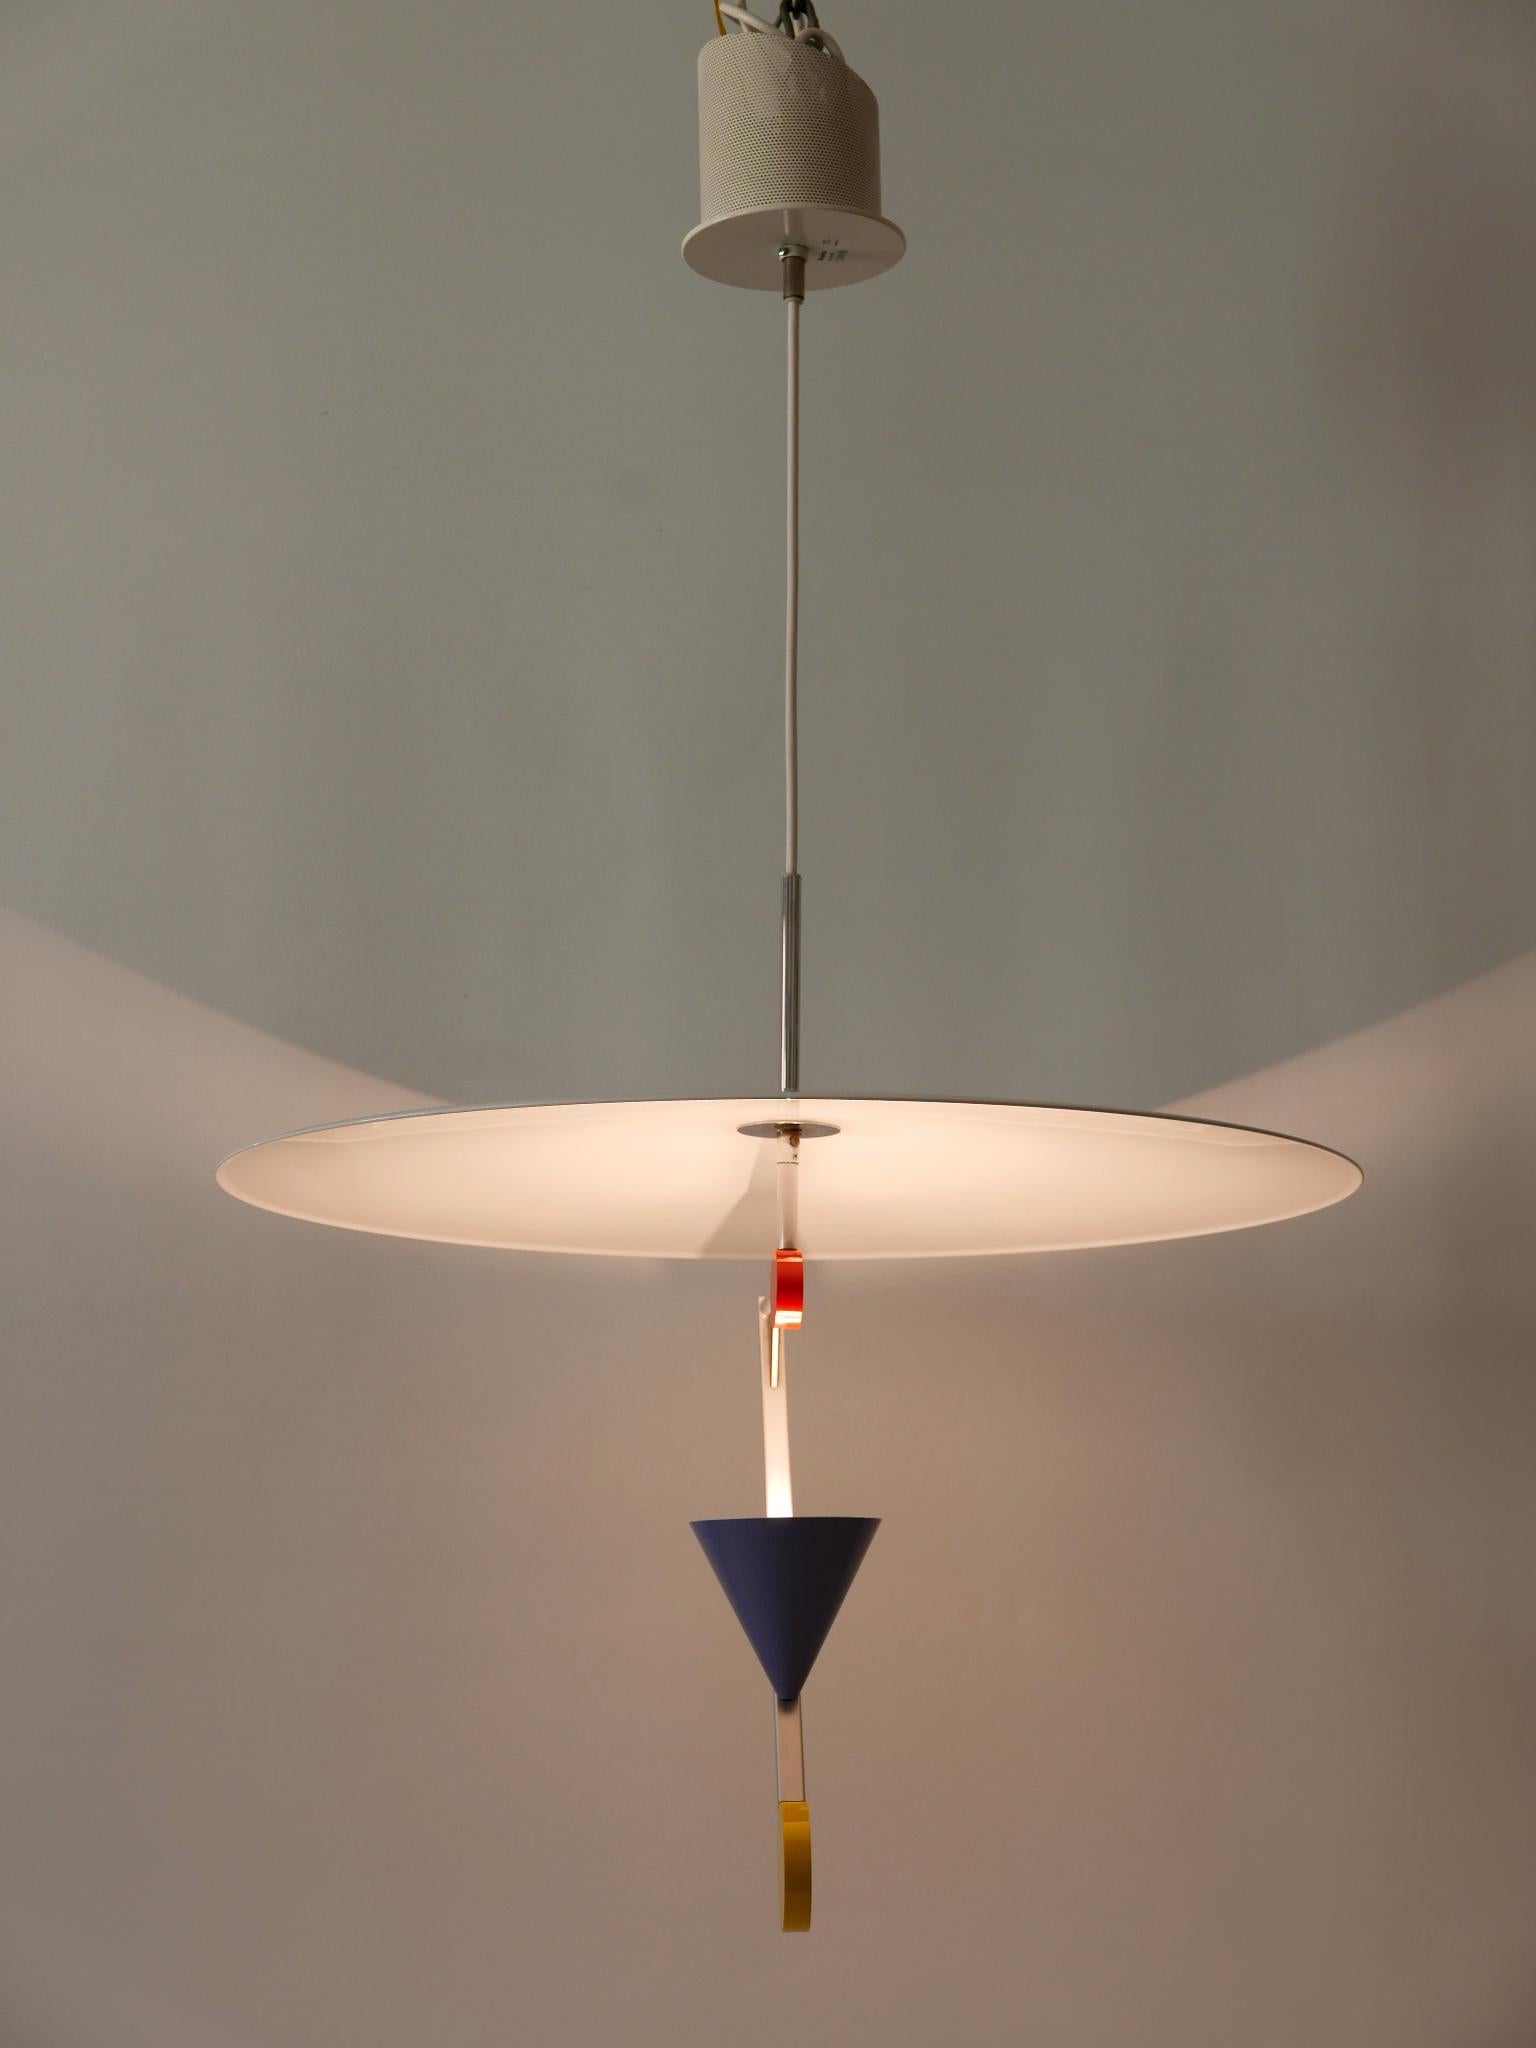 Late 20th Century Amazing Postmodern Pendant Lamps 'Halo There' by Olle Andersson for Borens 1982 For Sale